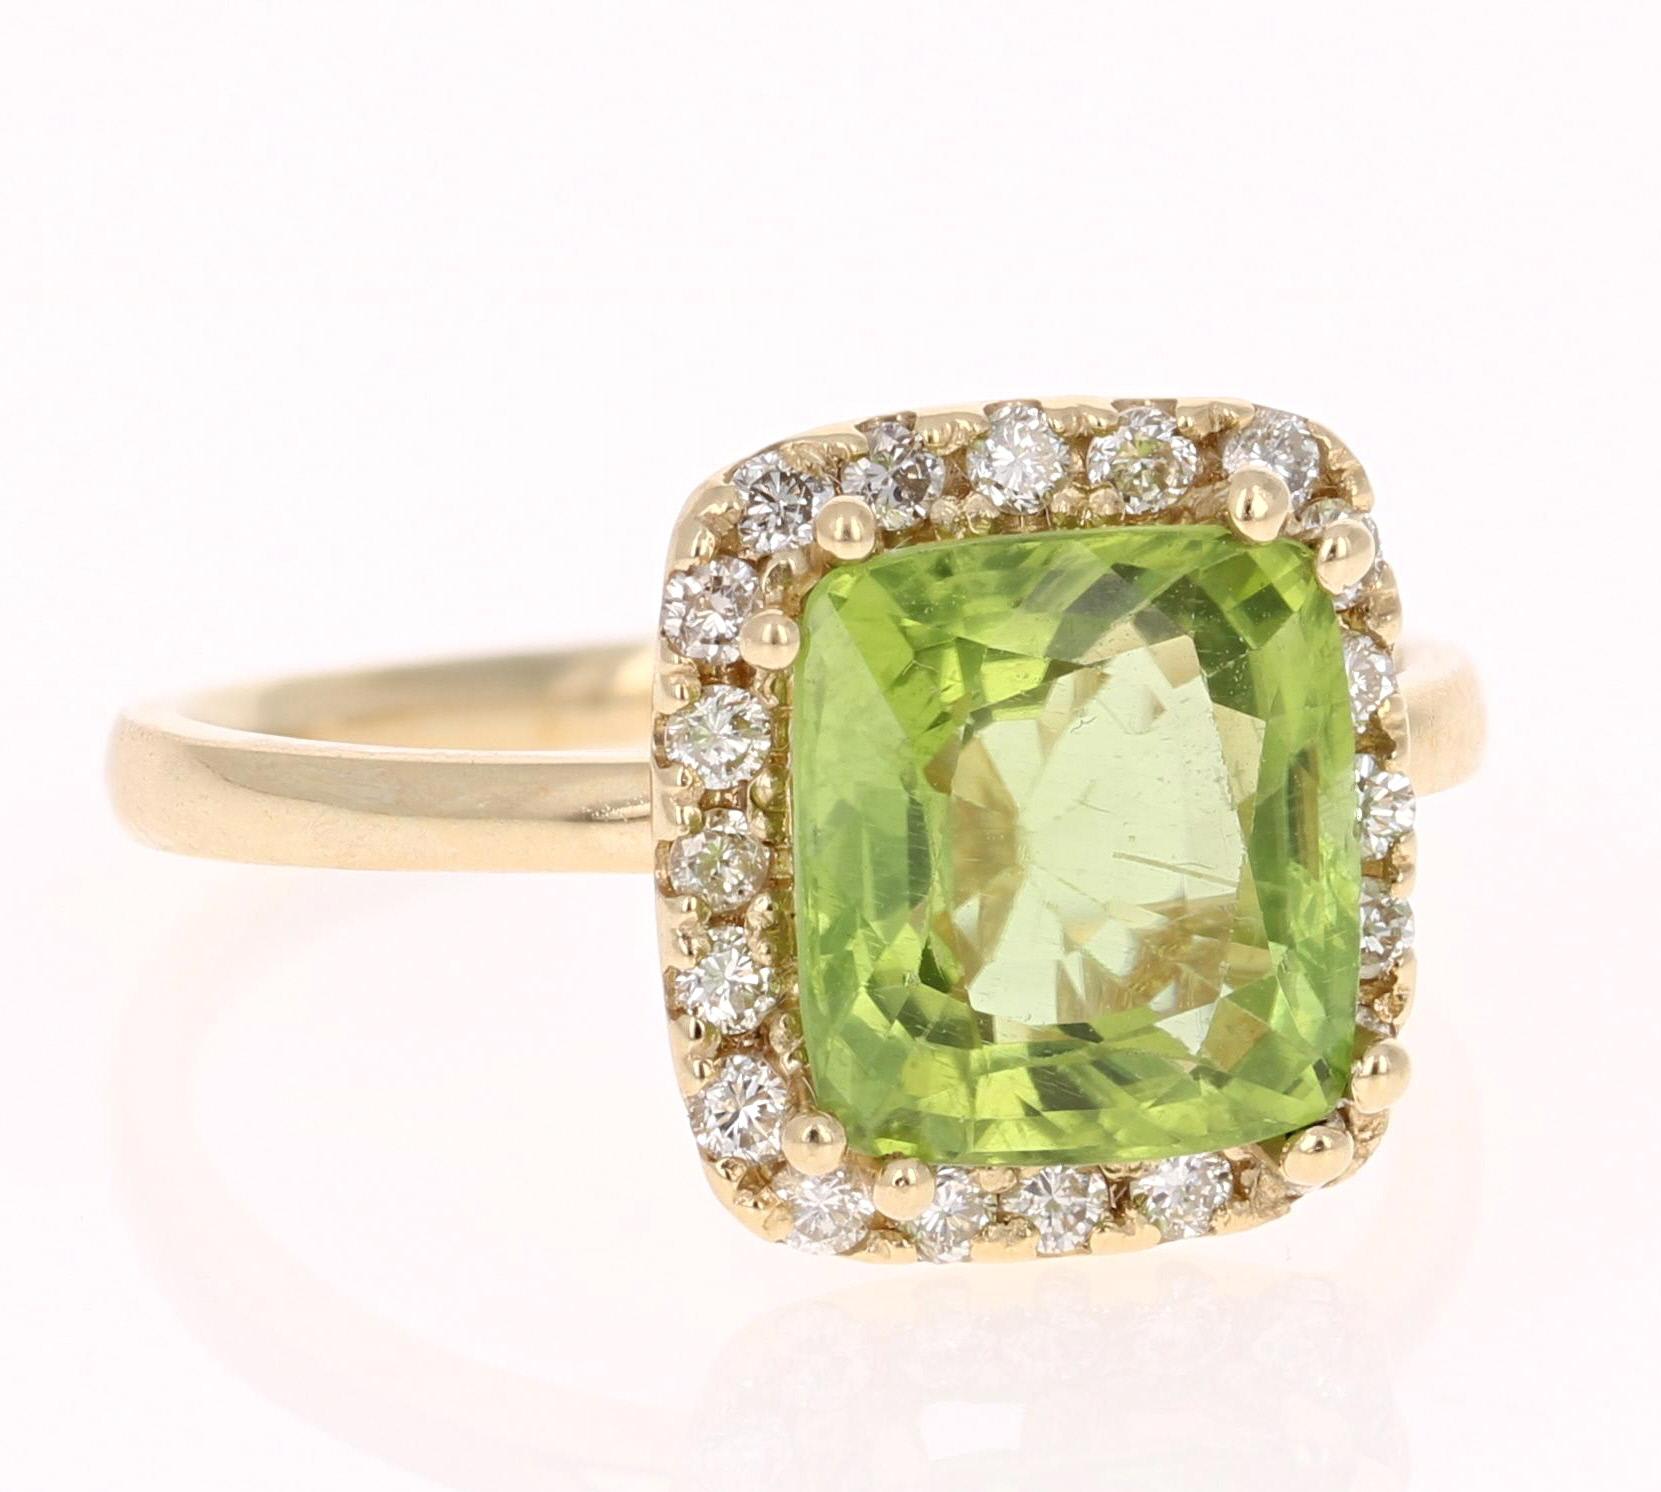 3.33 Carat Peridot Diamond Engagement Yellow Gold Ring - this can be a stunning and unique alternative to an engagement ring!

This beautiful ring has a Peridot in the center that weighs 3.02 carats. The ring is surrounded by a gorgeous halo of 20